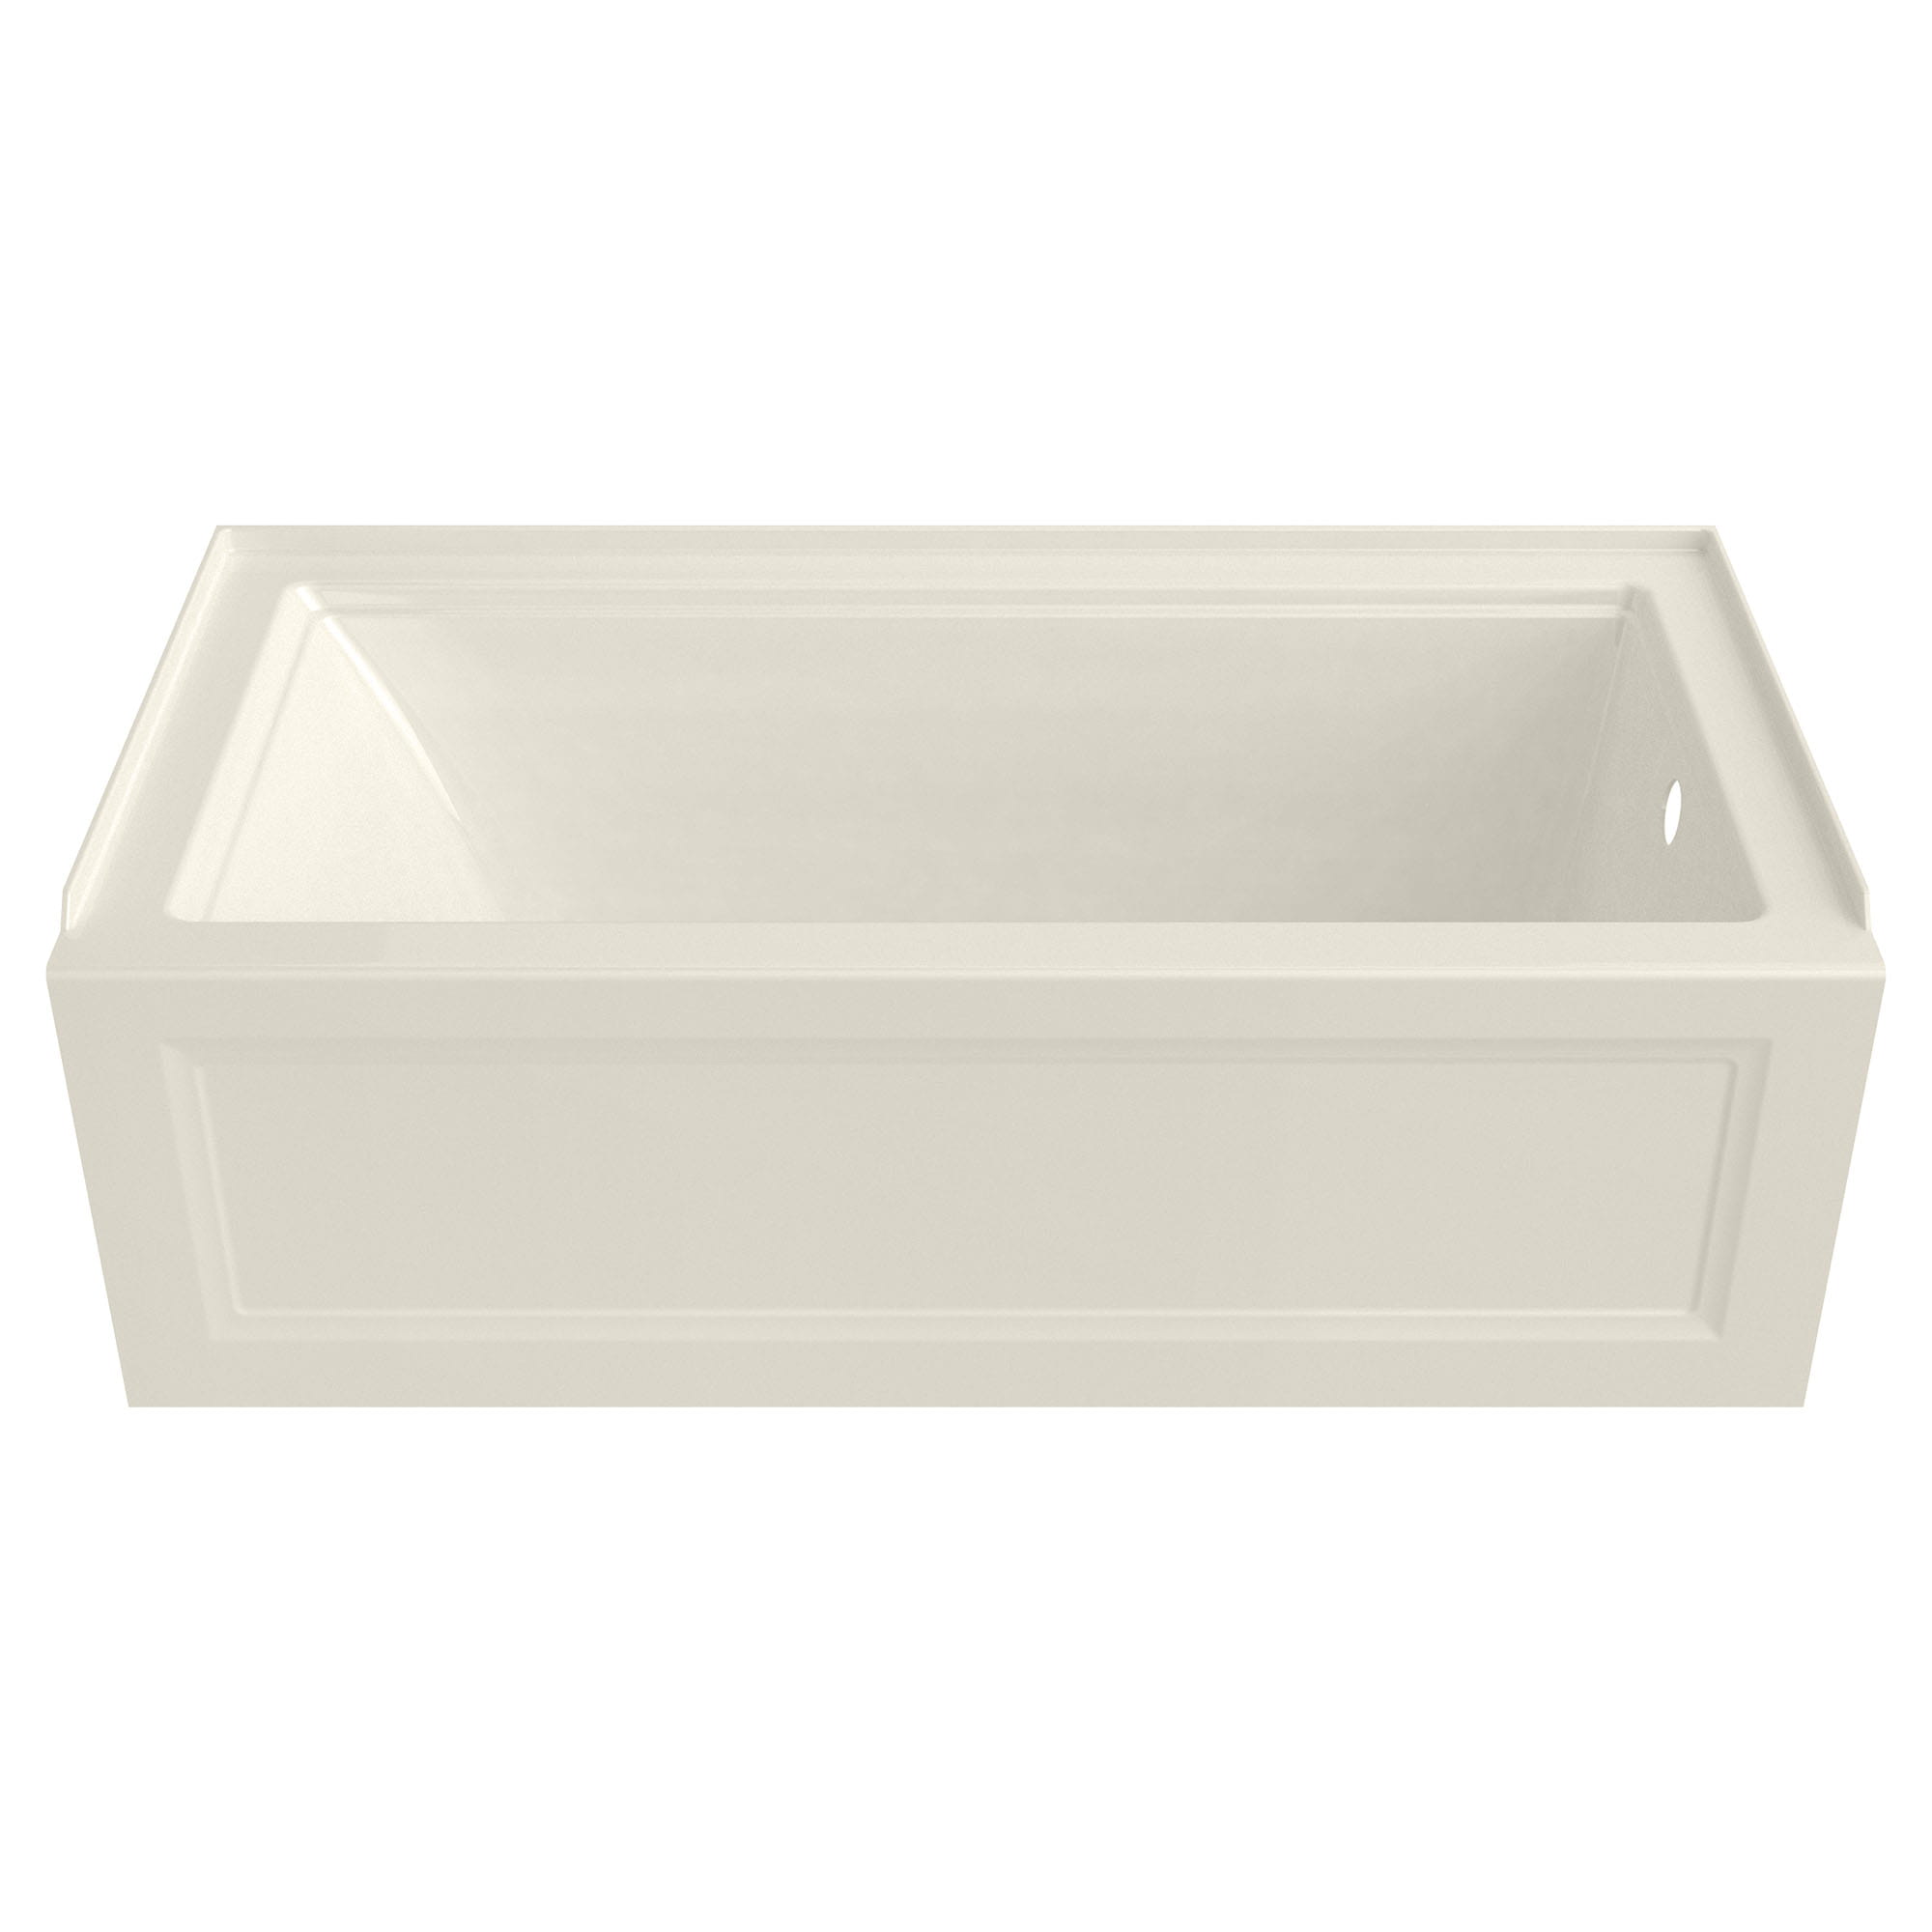 Town Square® S 60 x 30-Inch Integral Apron Bathtub With Right-Hand Outlet